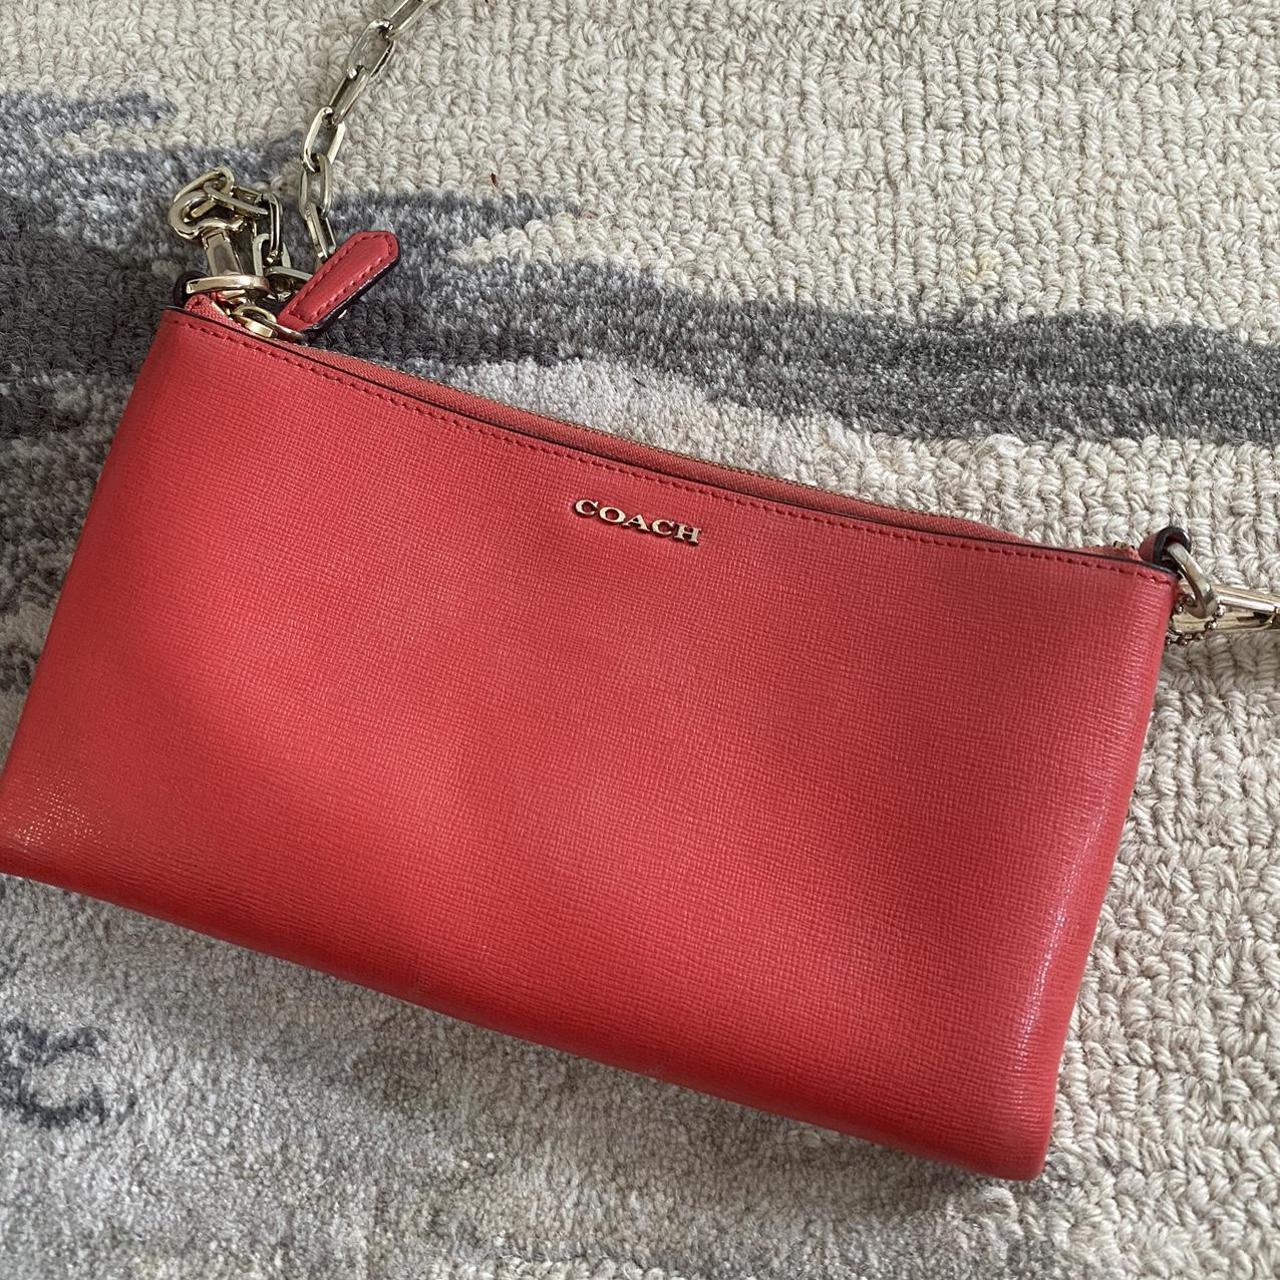 Let's Chat About The Coach Canteen Crossbody Handbag! - Fashion For Lunch